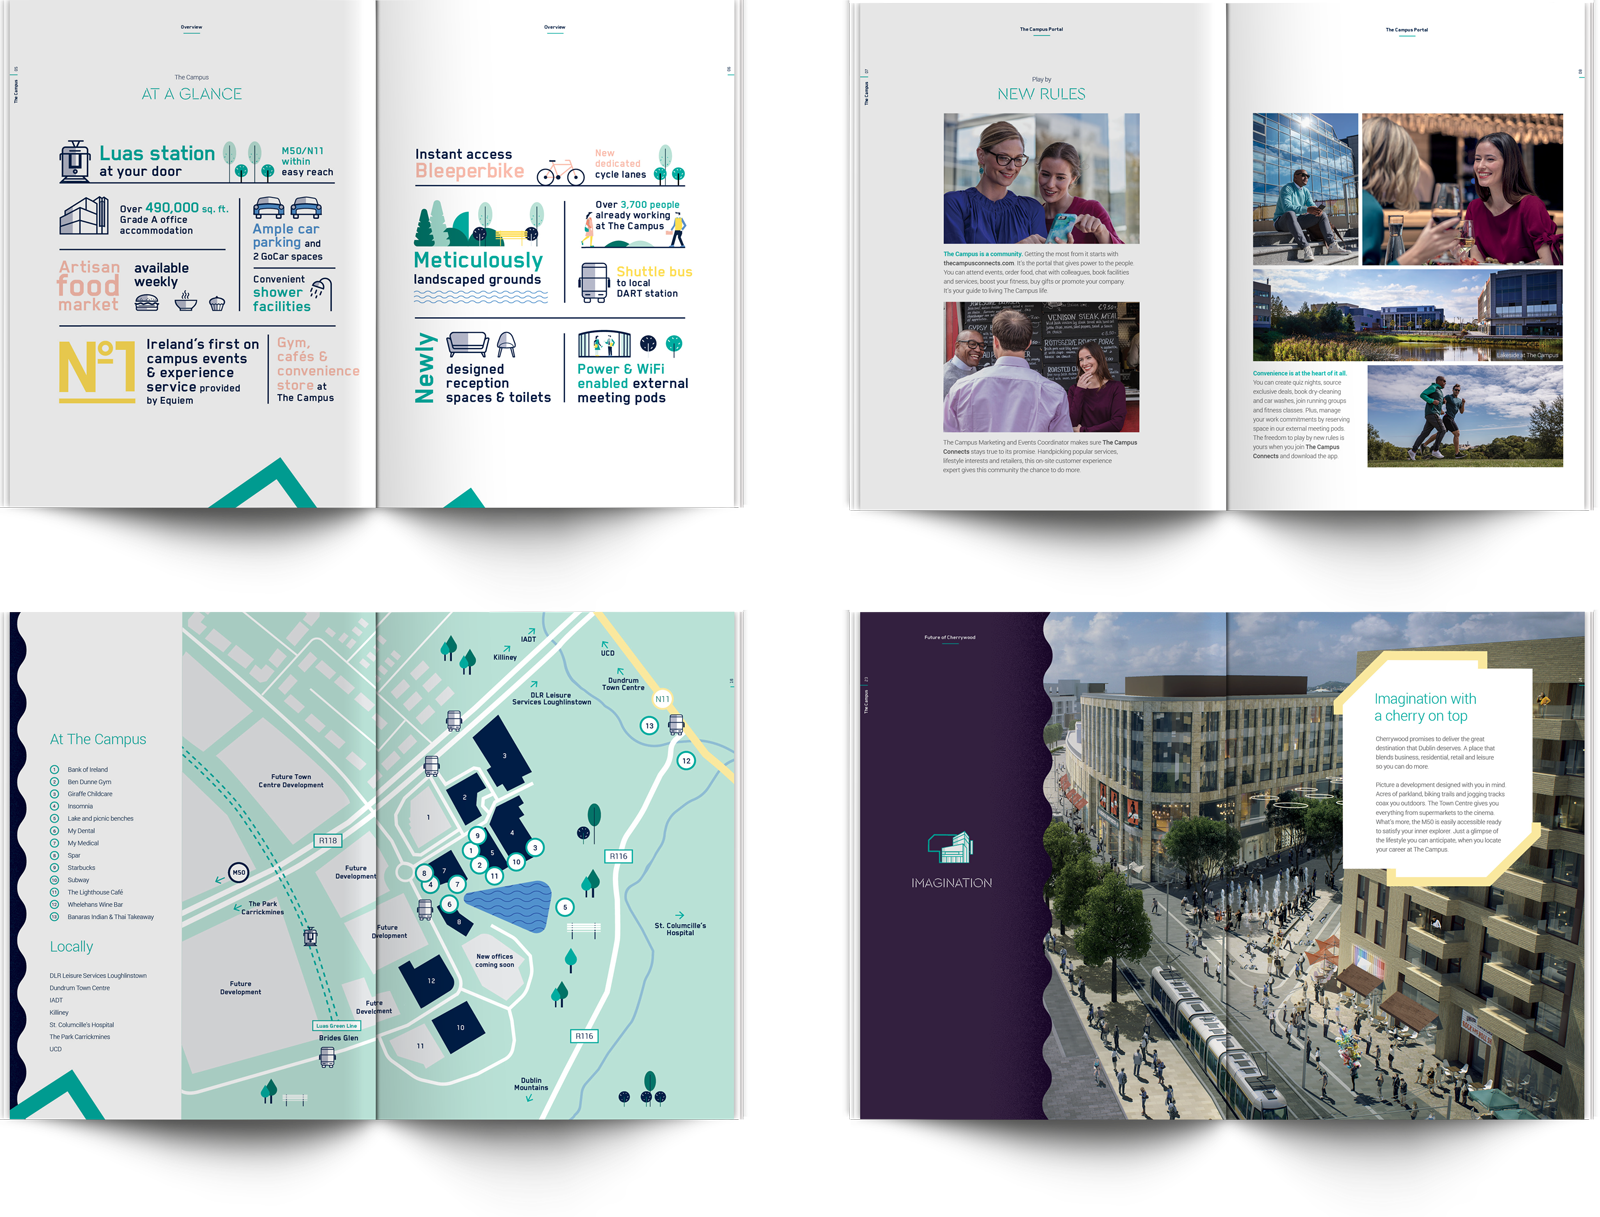 Brochures designed by Originate Creative Agency for The Campus in Ireland